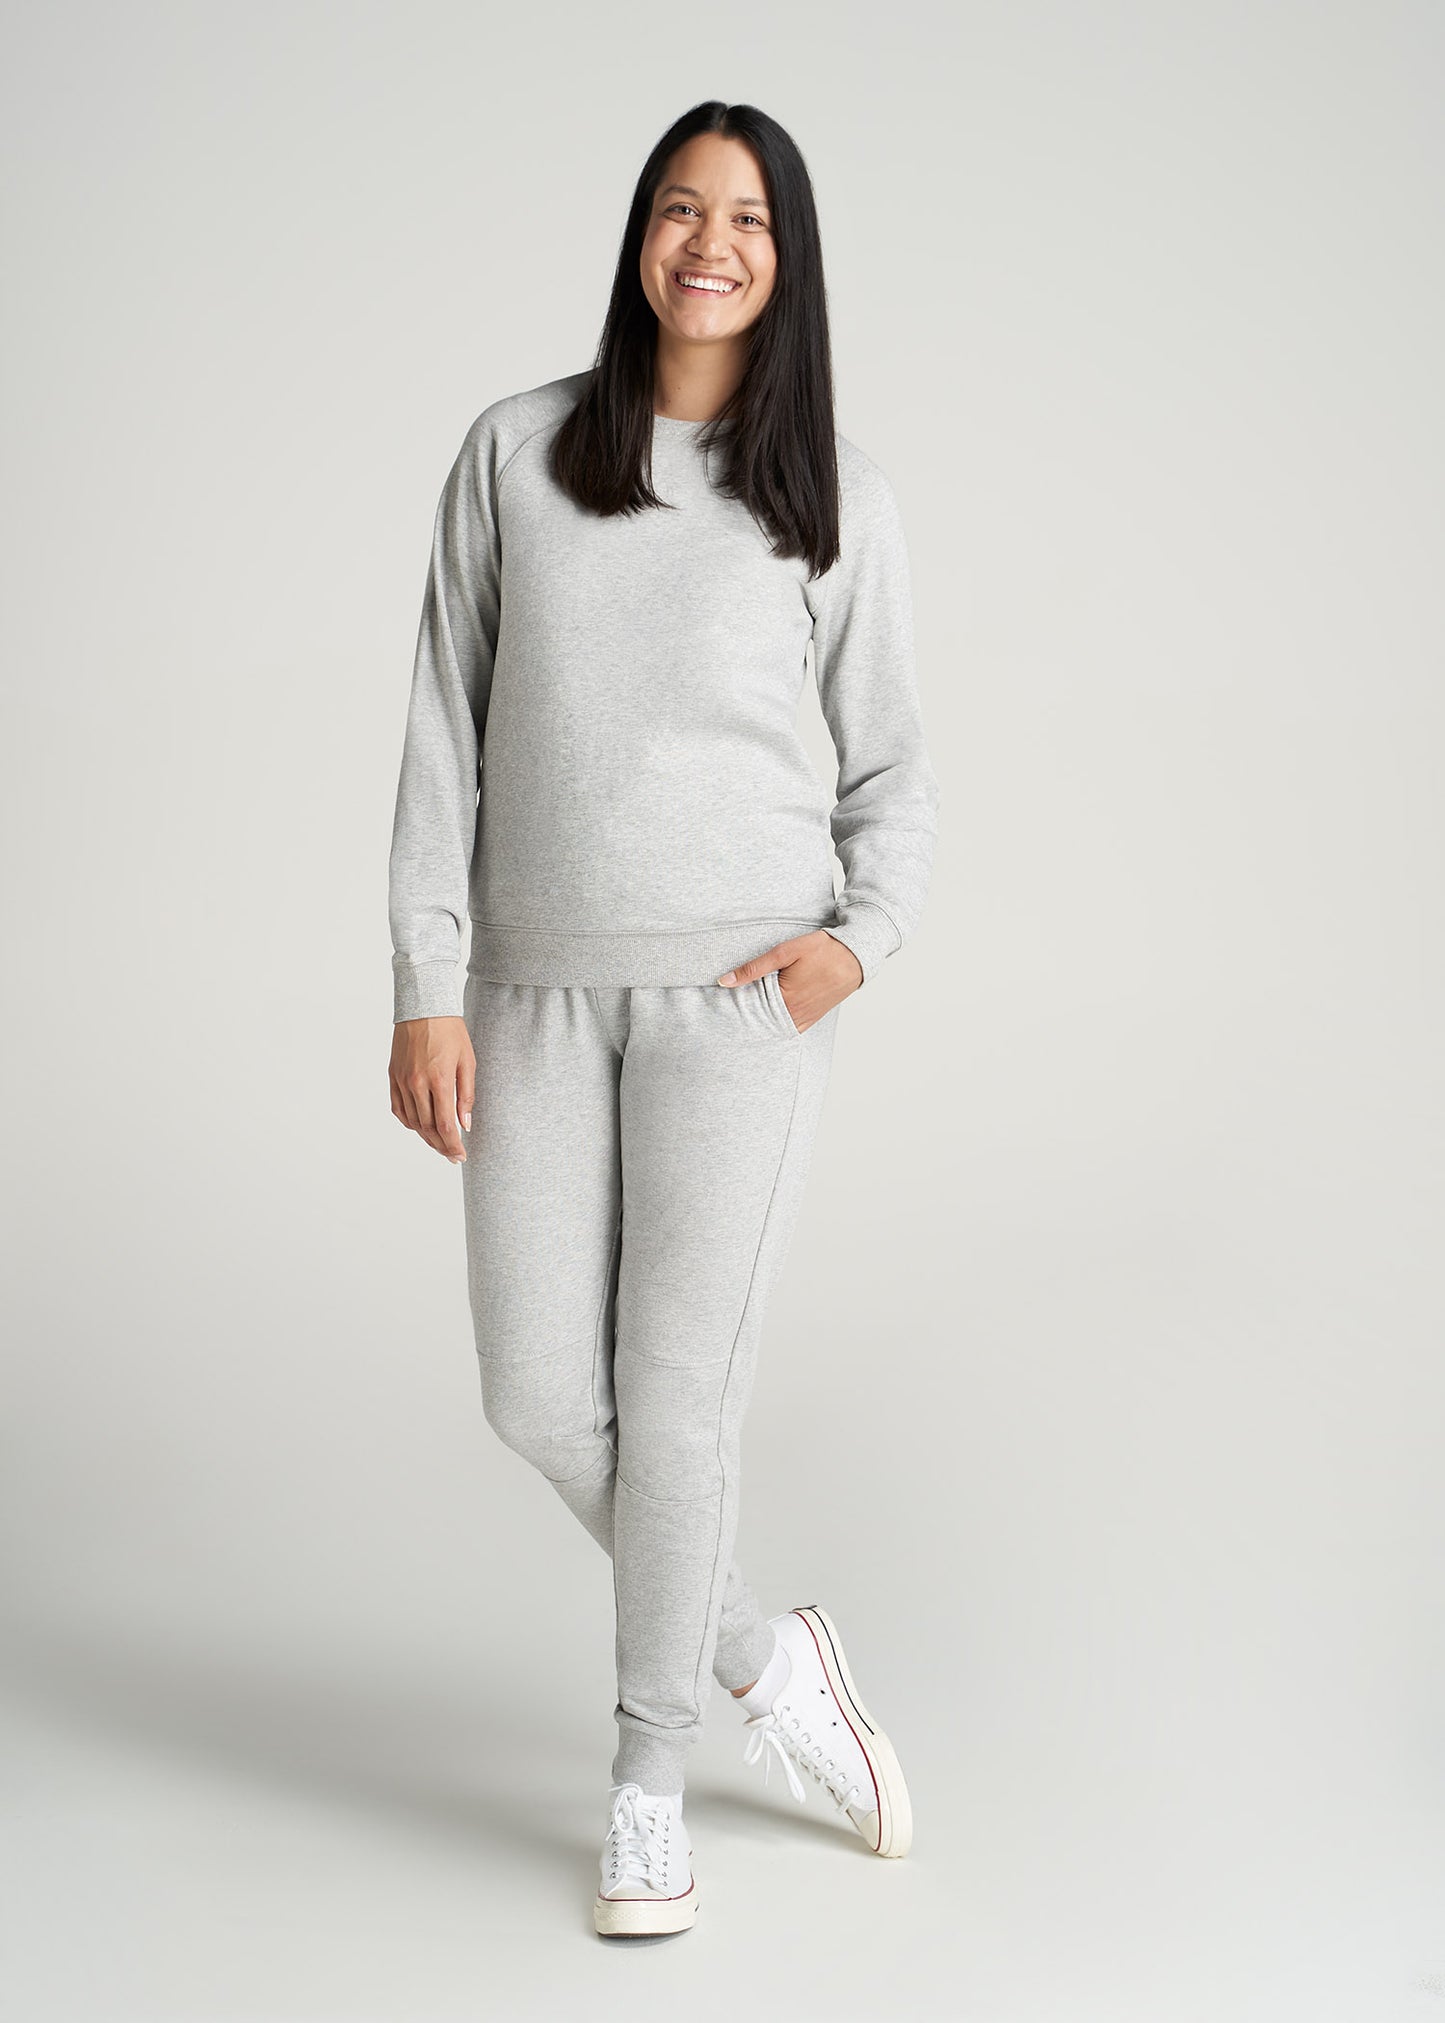 Wearever French Terry Tall Women's Joggers in Grey Mix